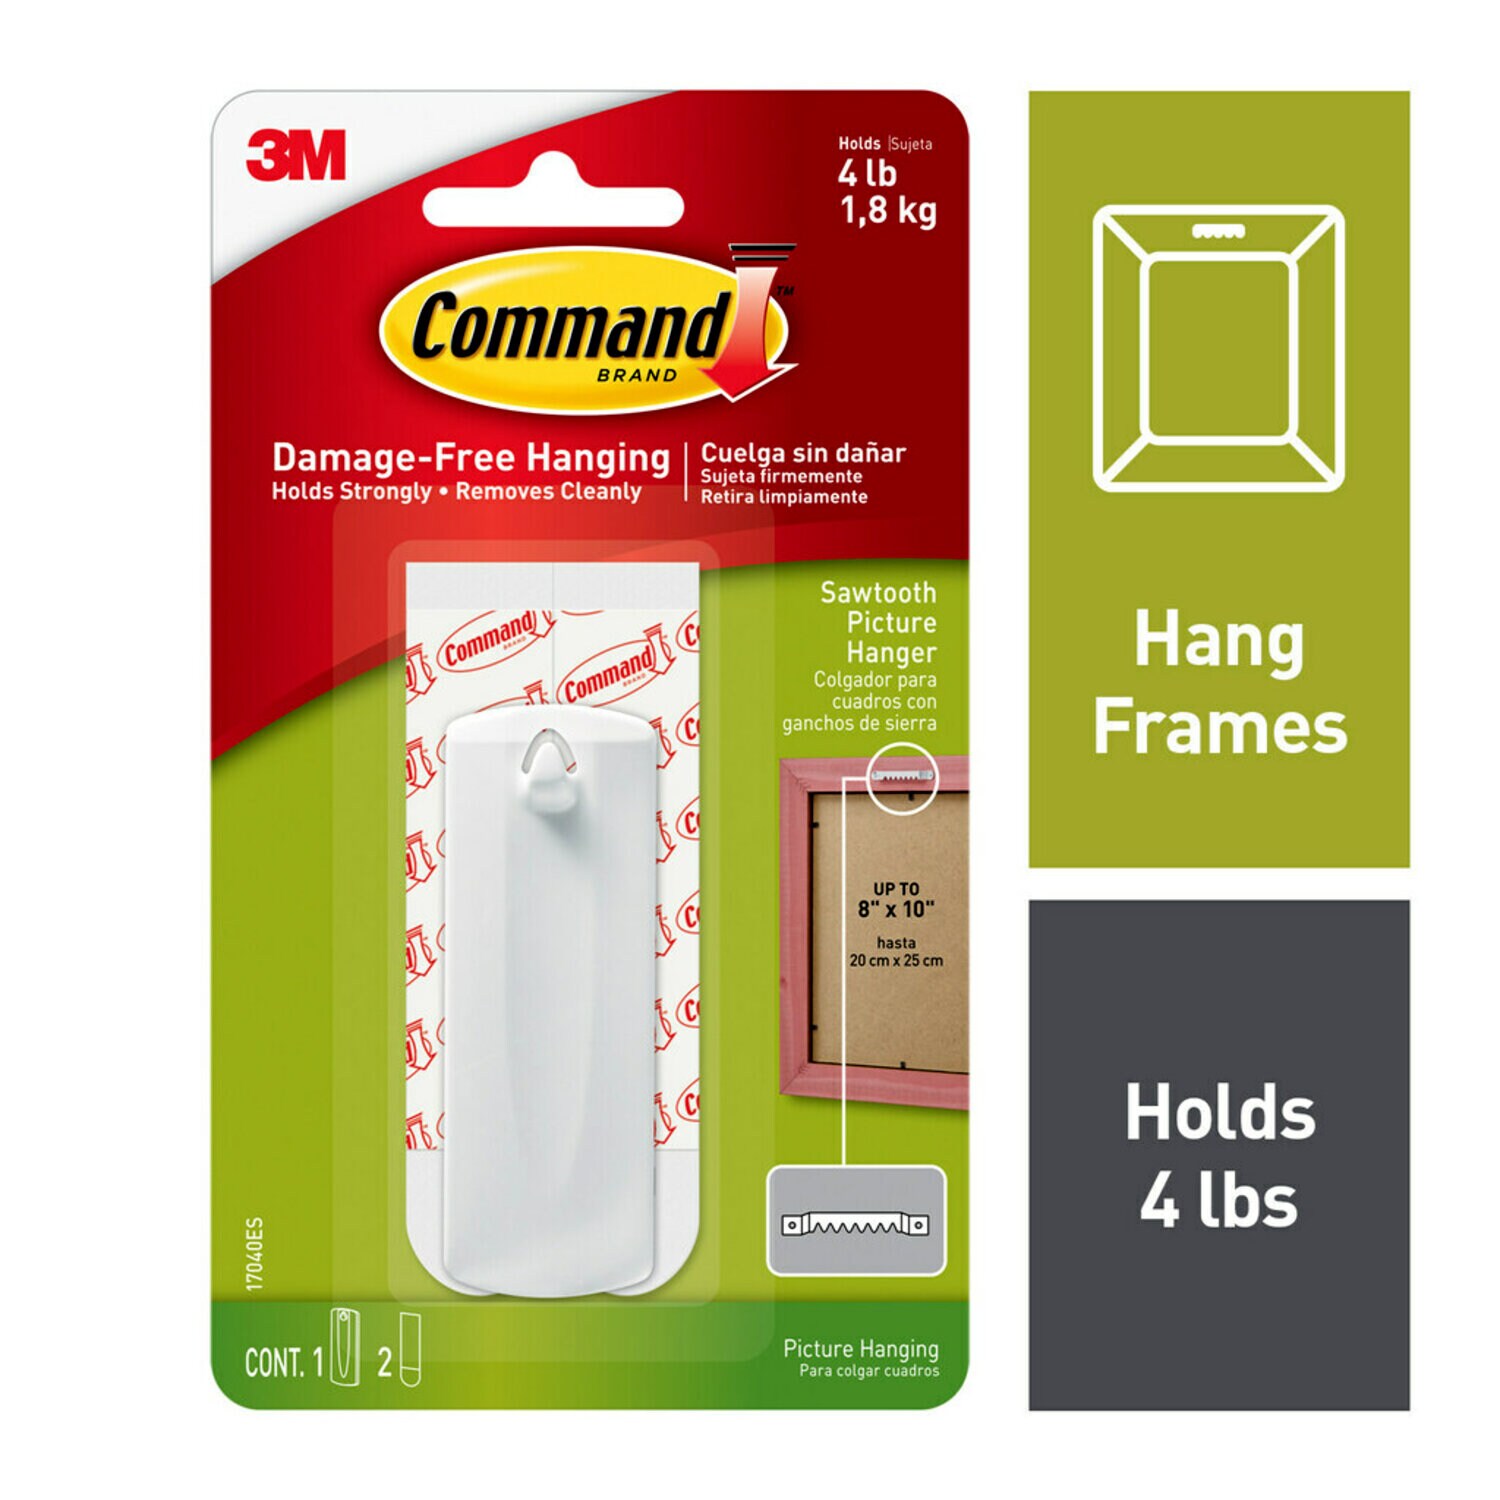 Command Clear Wire Hanger Hook, Value Pack of 9 Hooks and 12 Adhesive  Strips, Transparent - Damage Free Hanging - Holds up to 225 gm